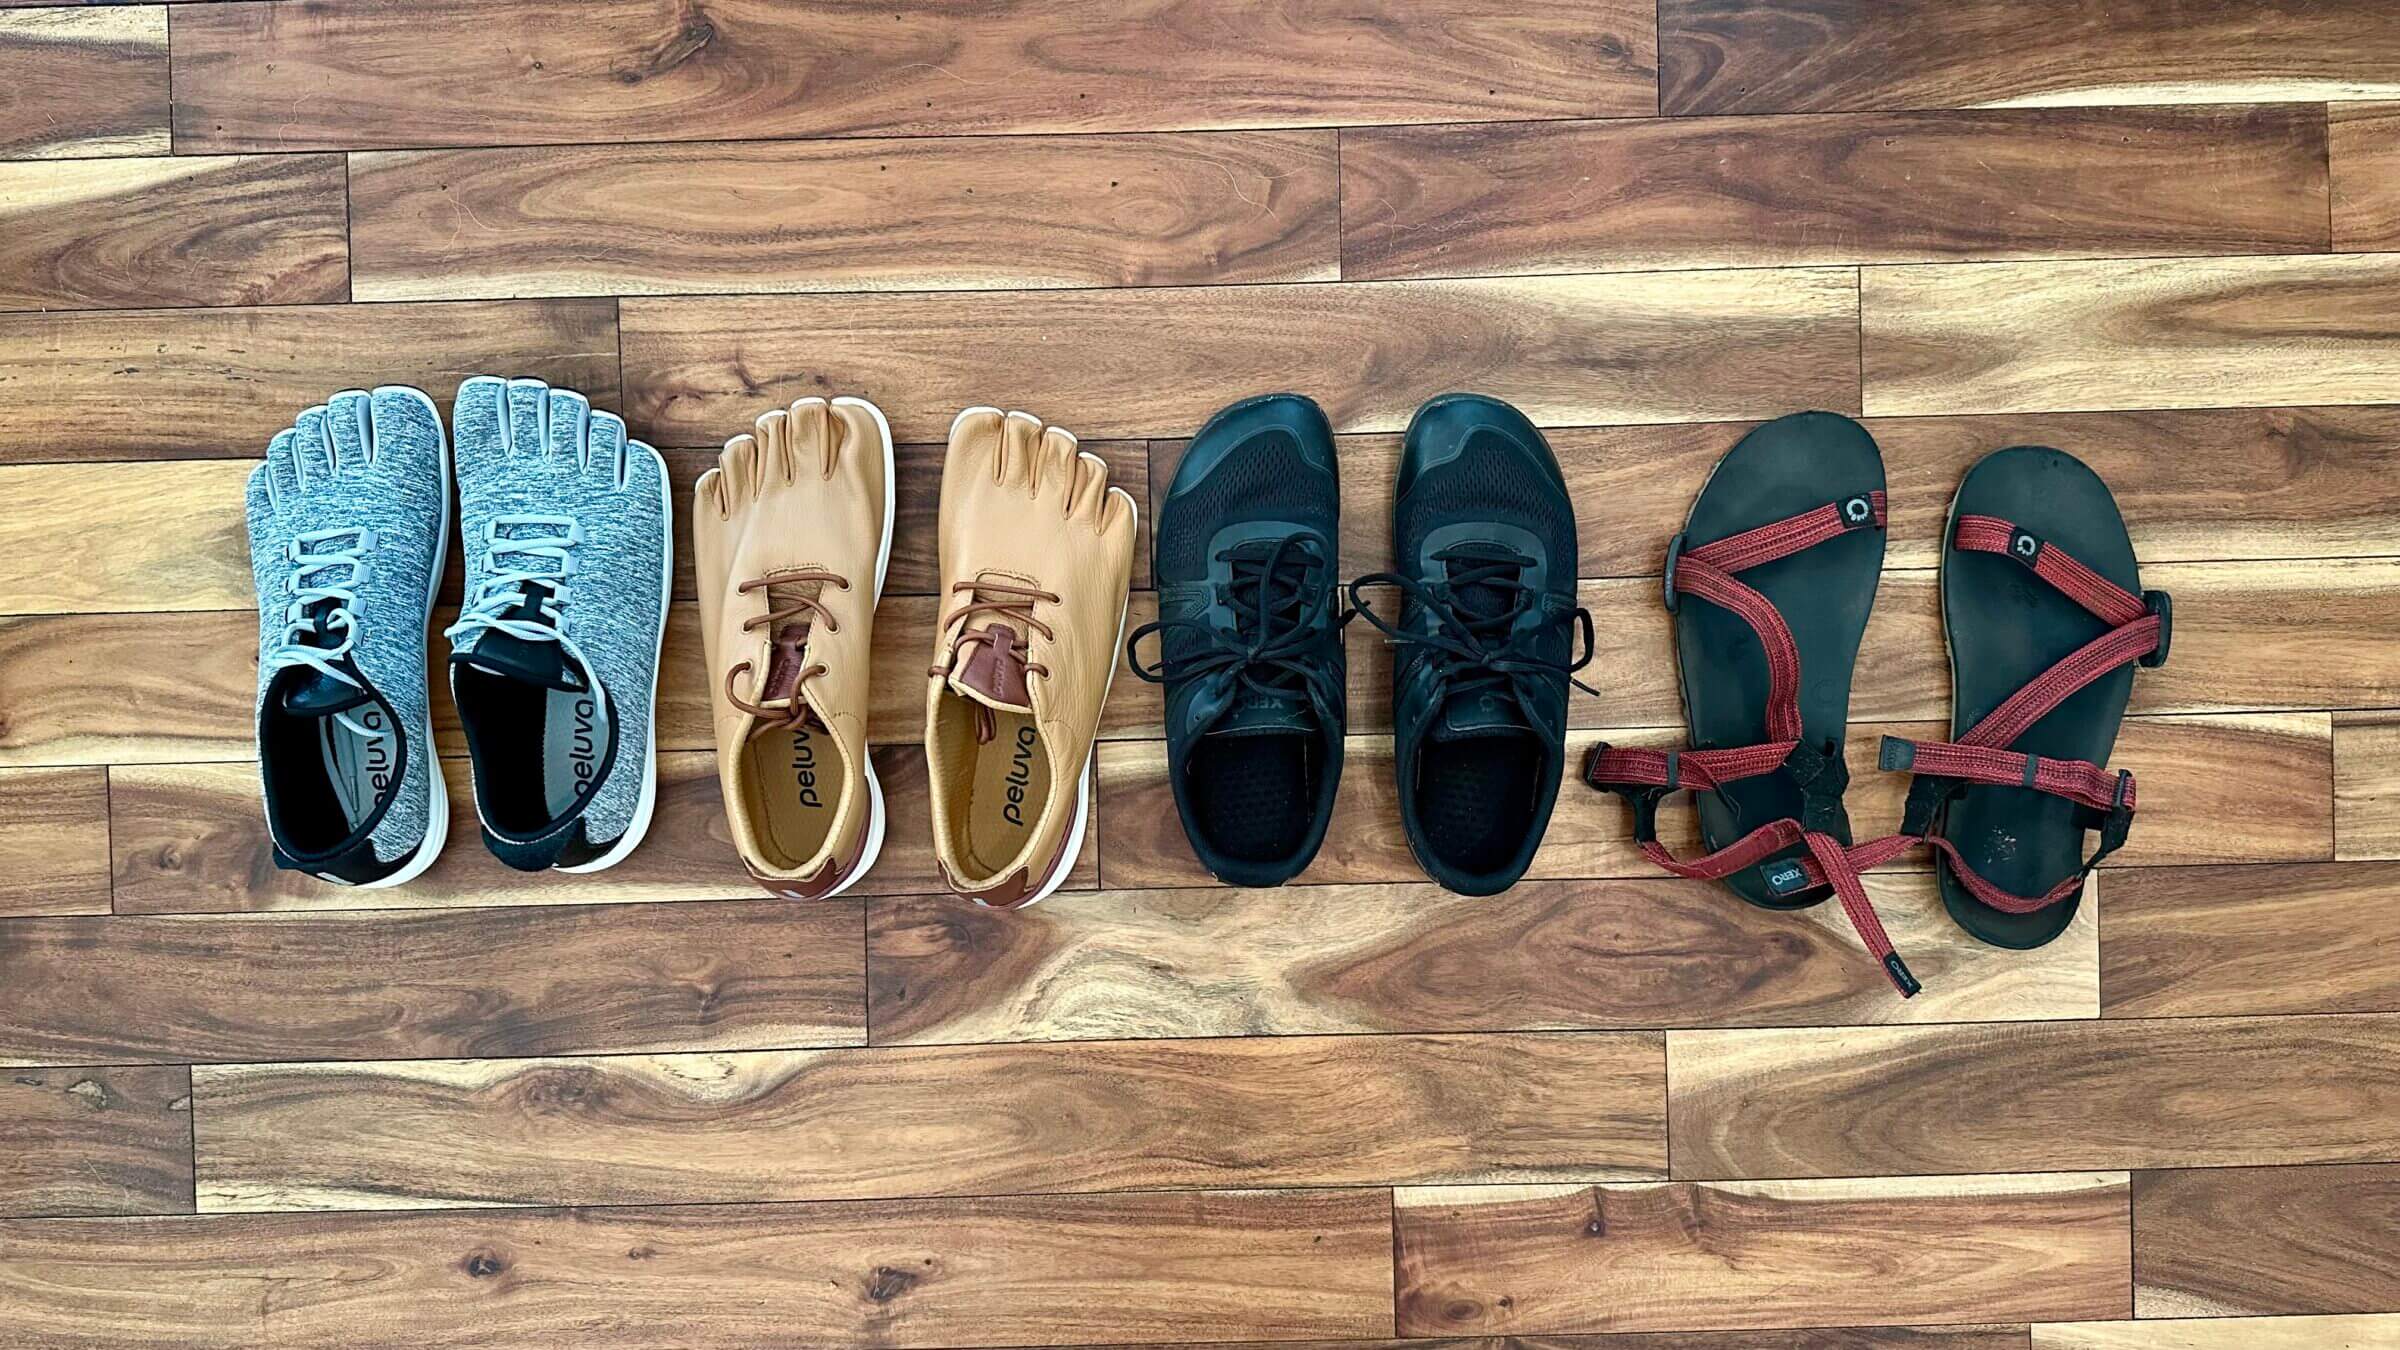 Barefoot Shoe Benefits (And Tips For Choosing the Right Pair)